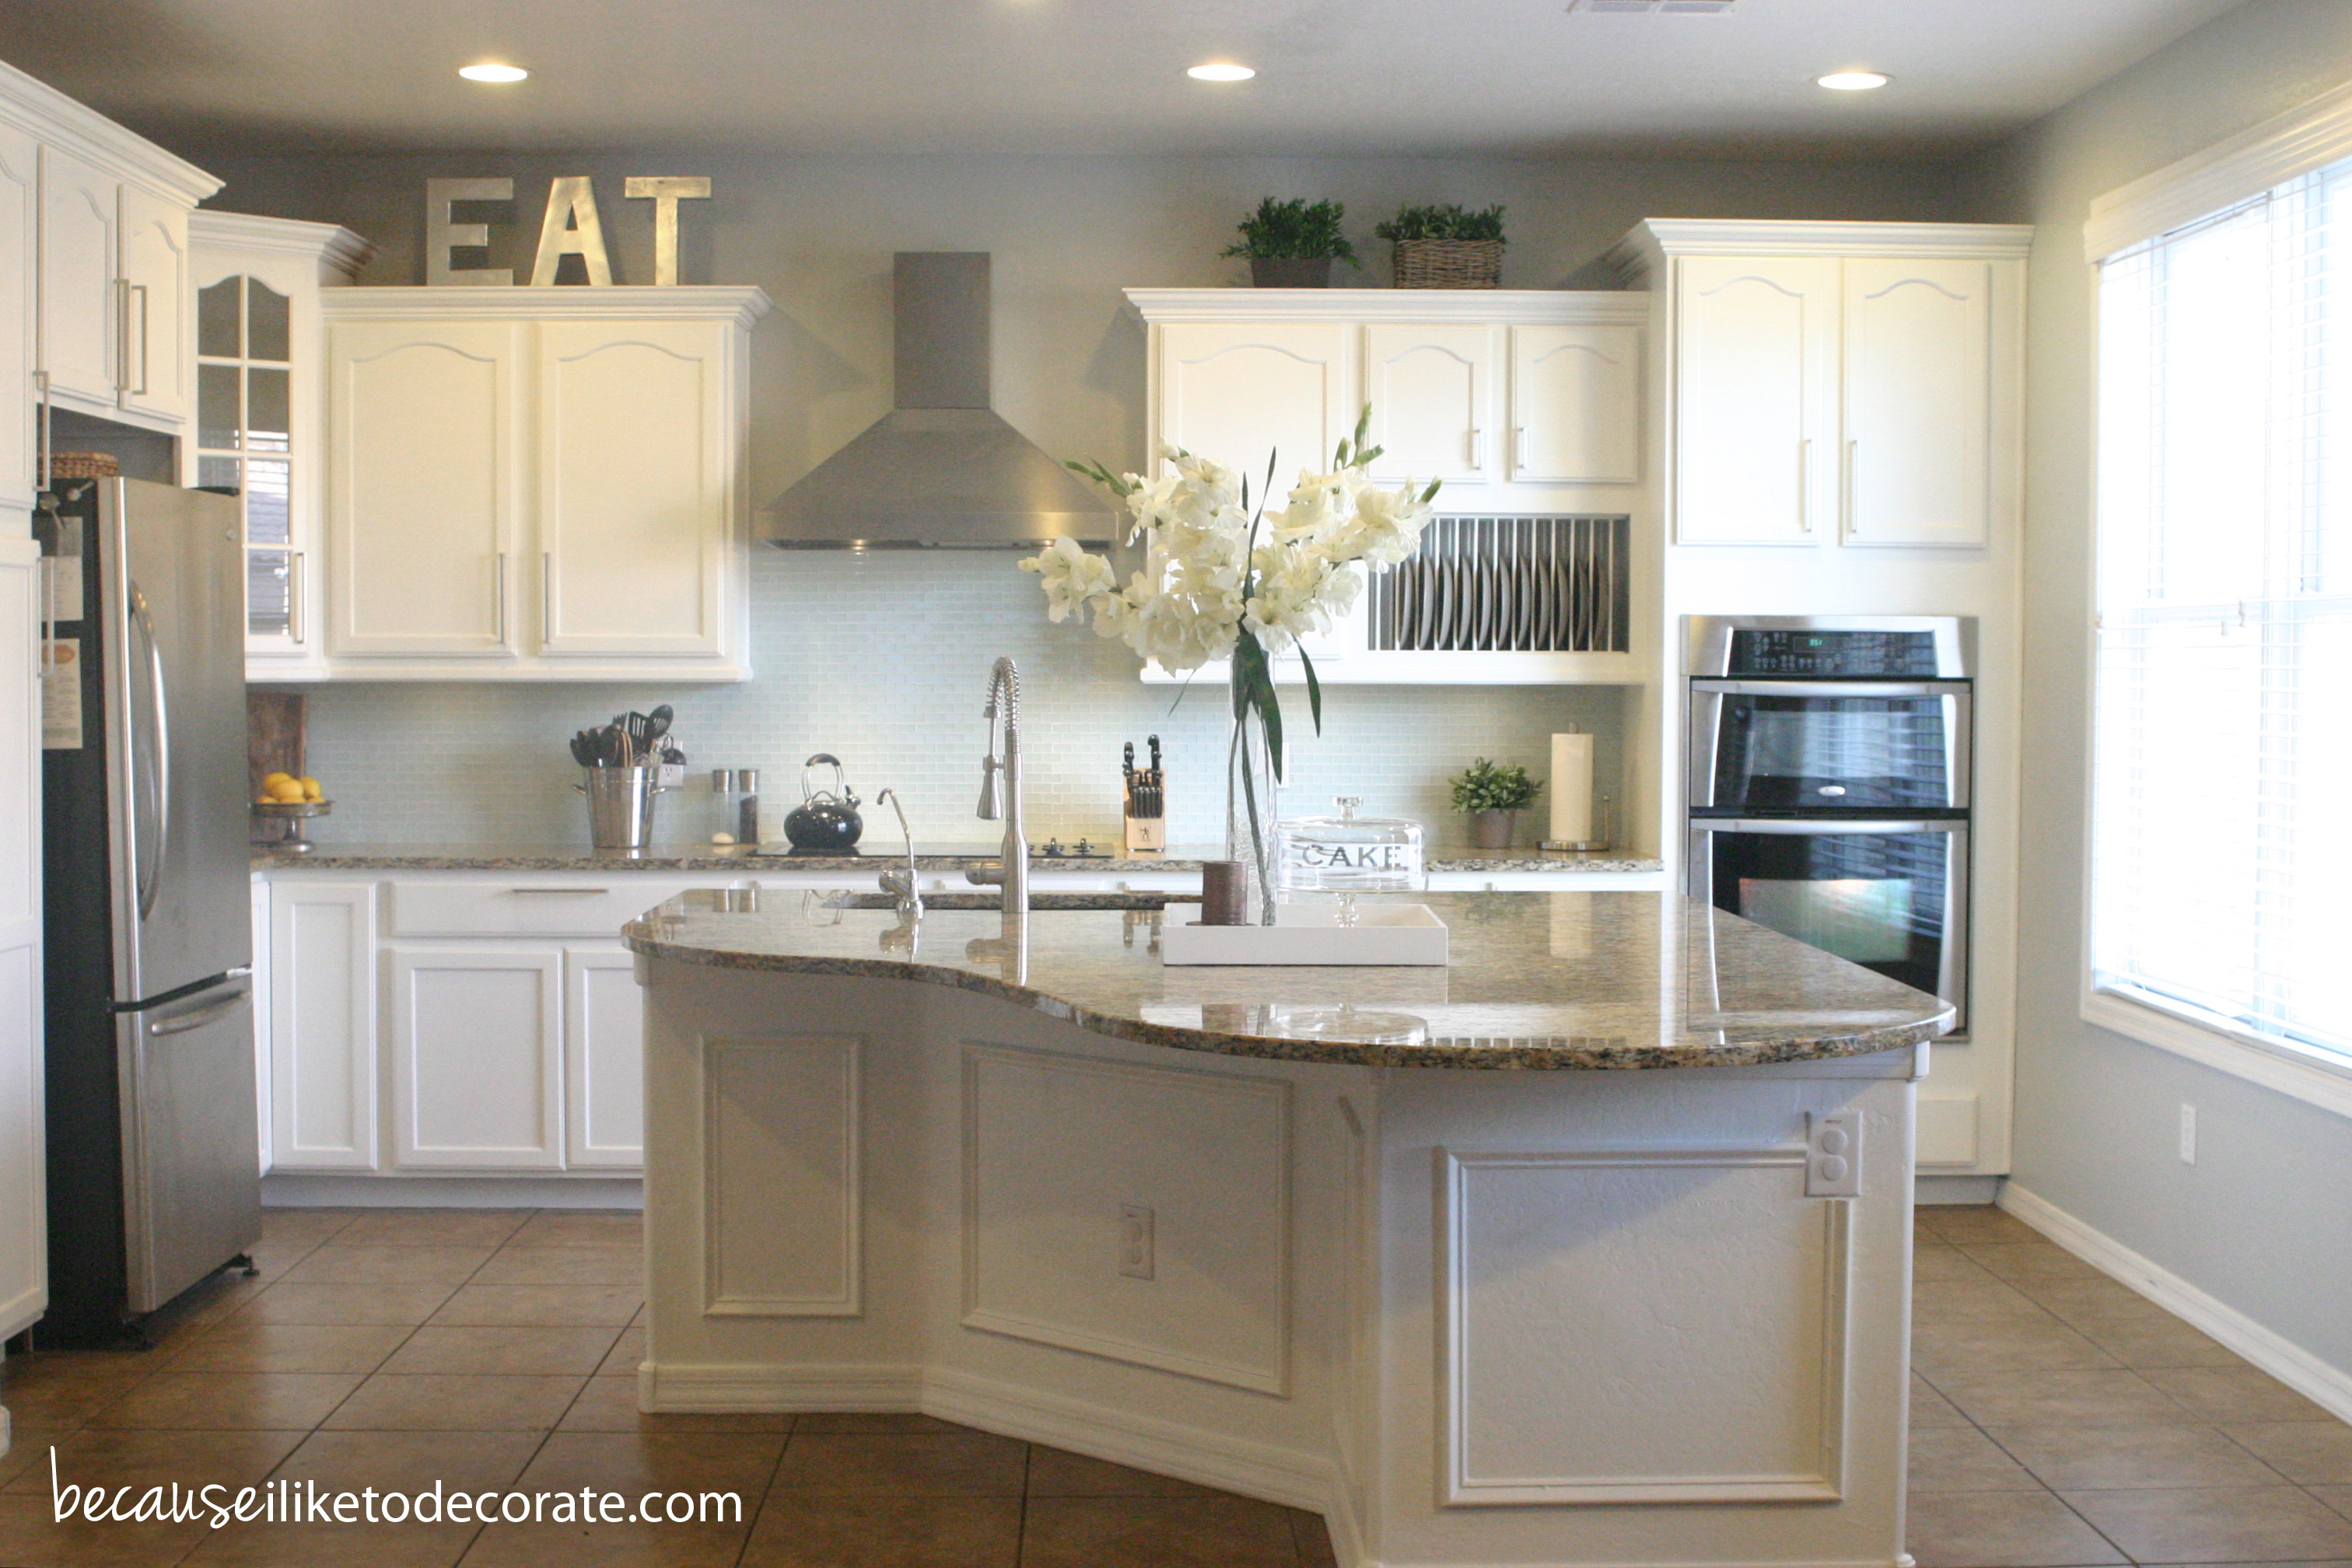 16 Samples Of Kitchen Molding - Custom Ideas For Your ...